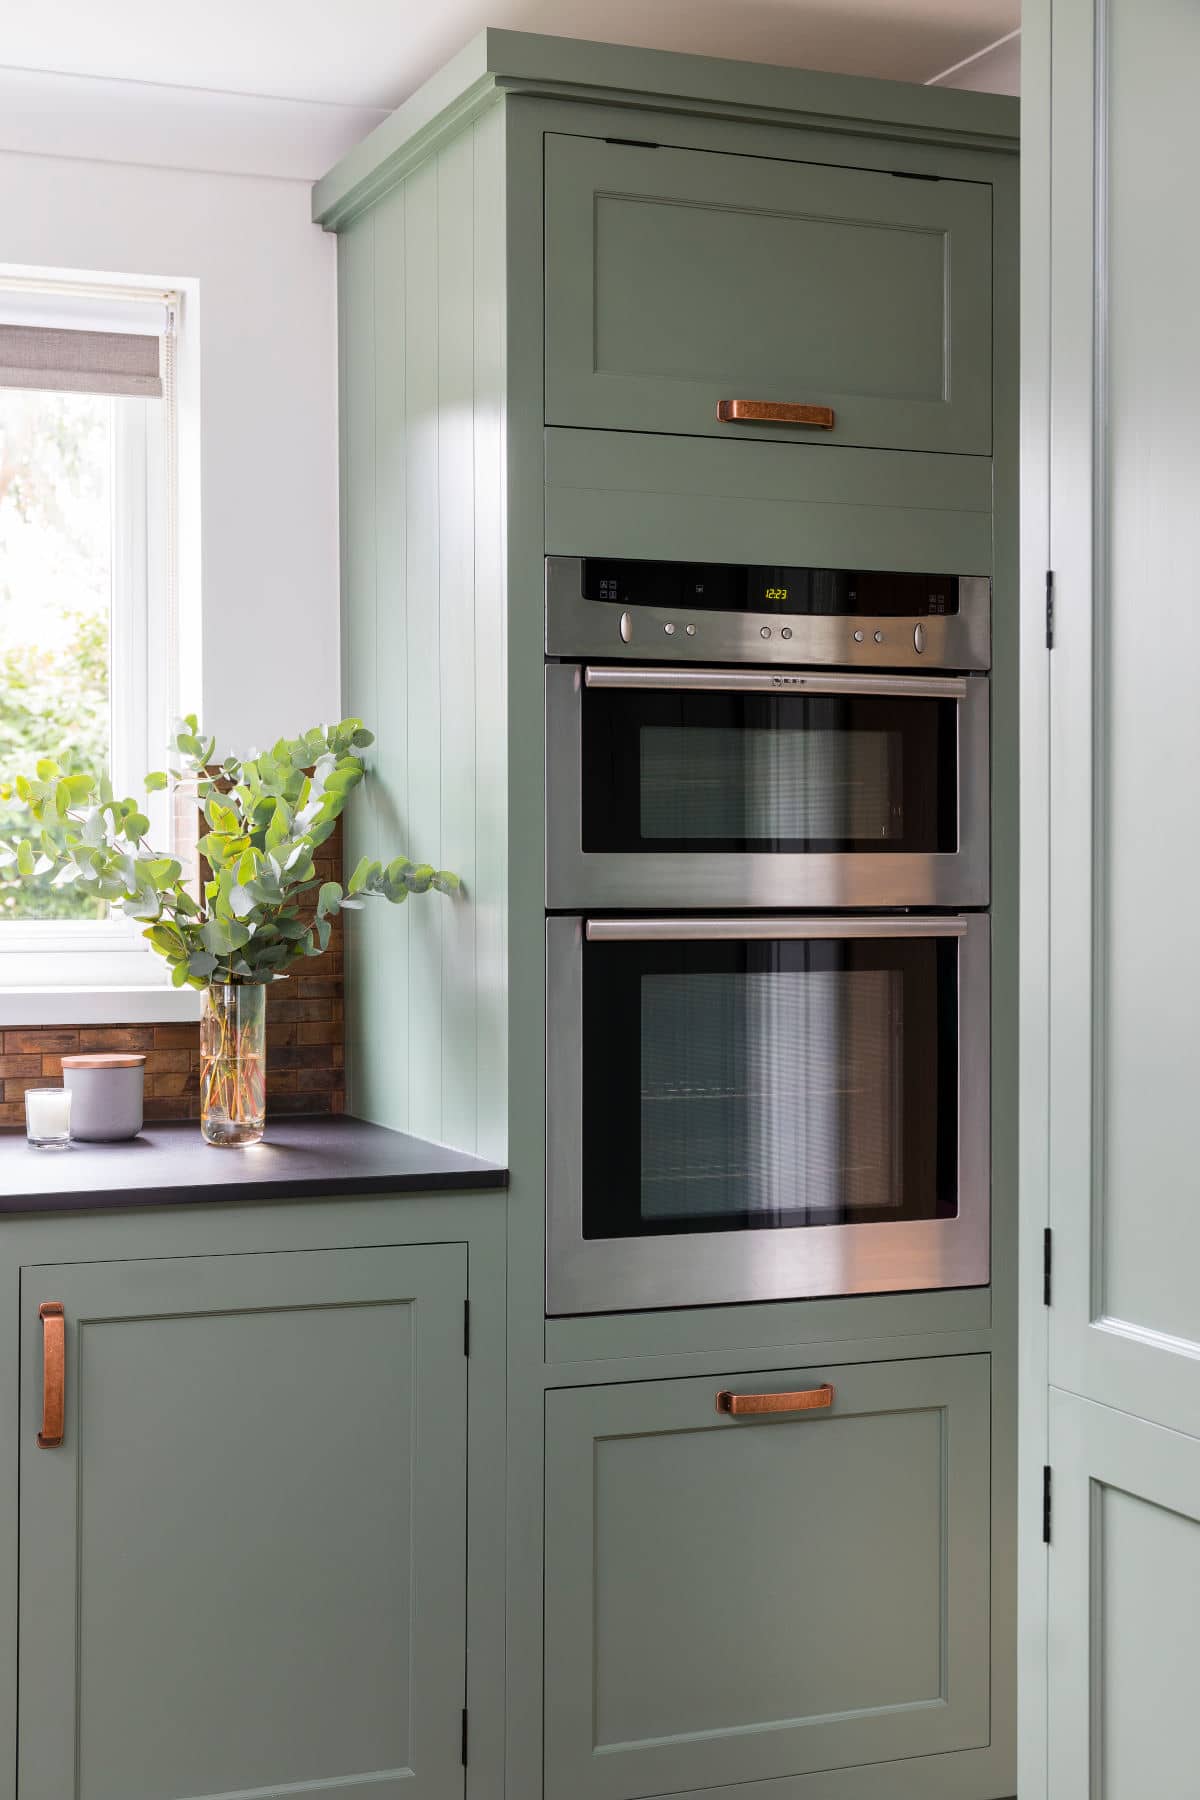 Image of Borston Close 19 in Making the kitchen the heart of the home - Cosentino